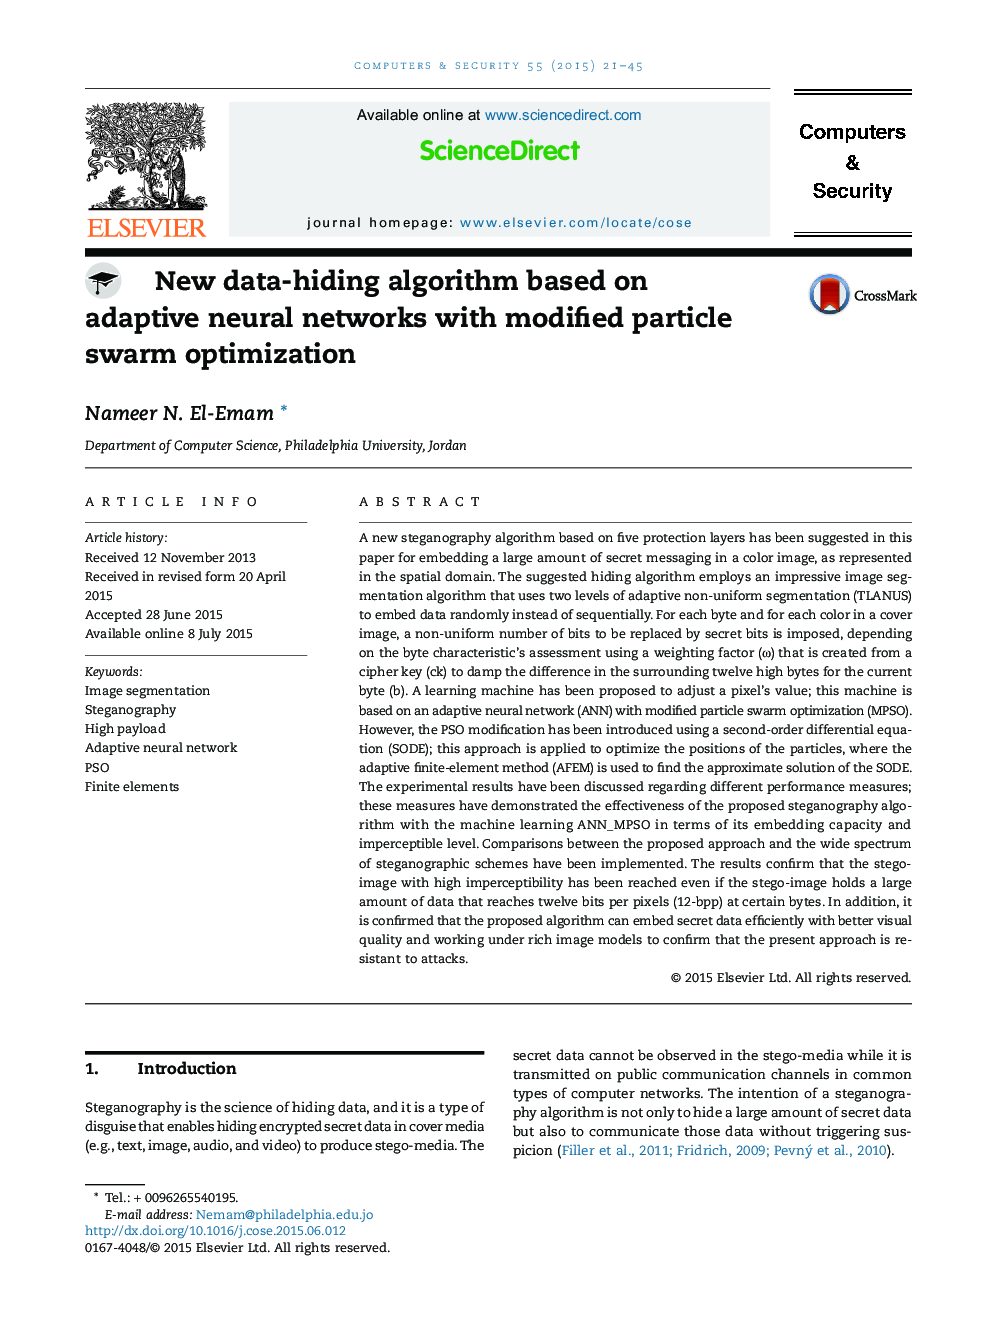 New data-hiding algorithm based on adaptive neural networks with modified particle swarm optimization